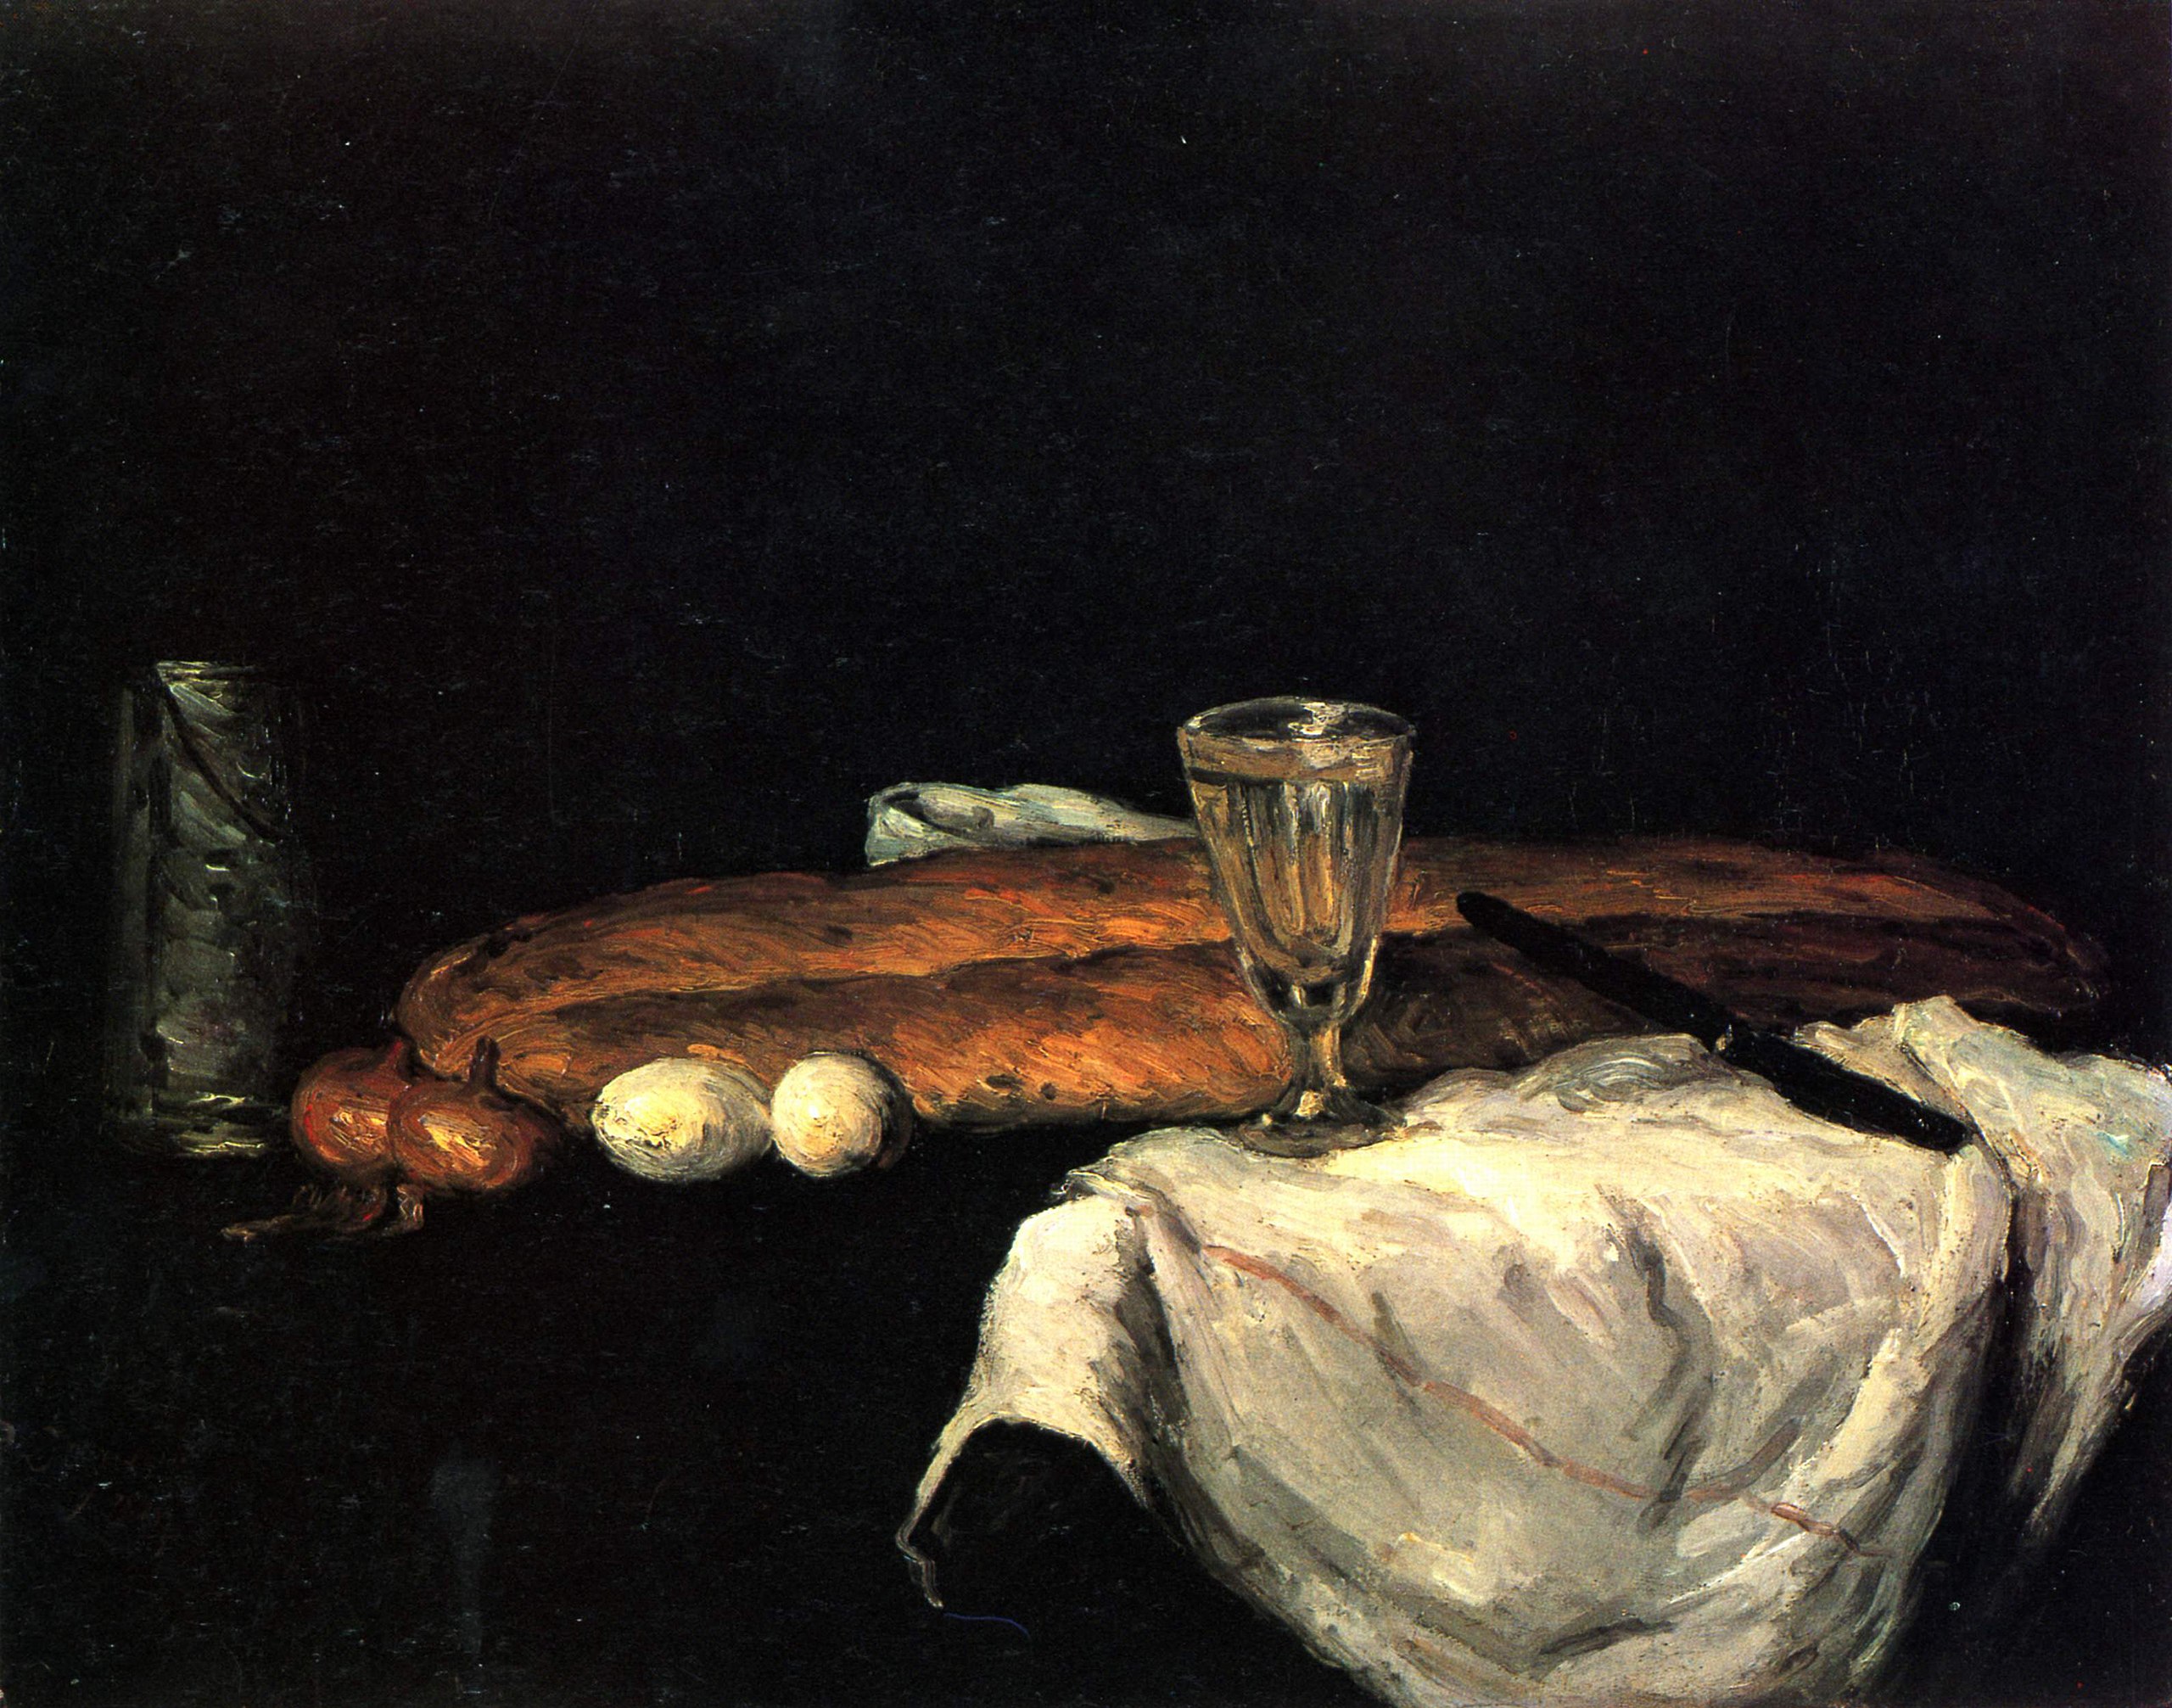 The painting "Still Life with Bread and Eggs" by Paul Cézanne.